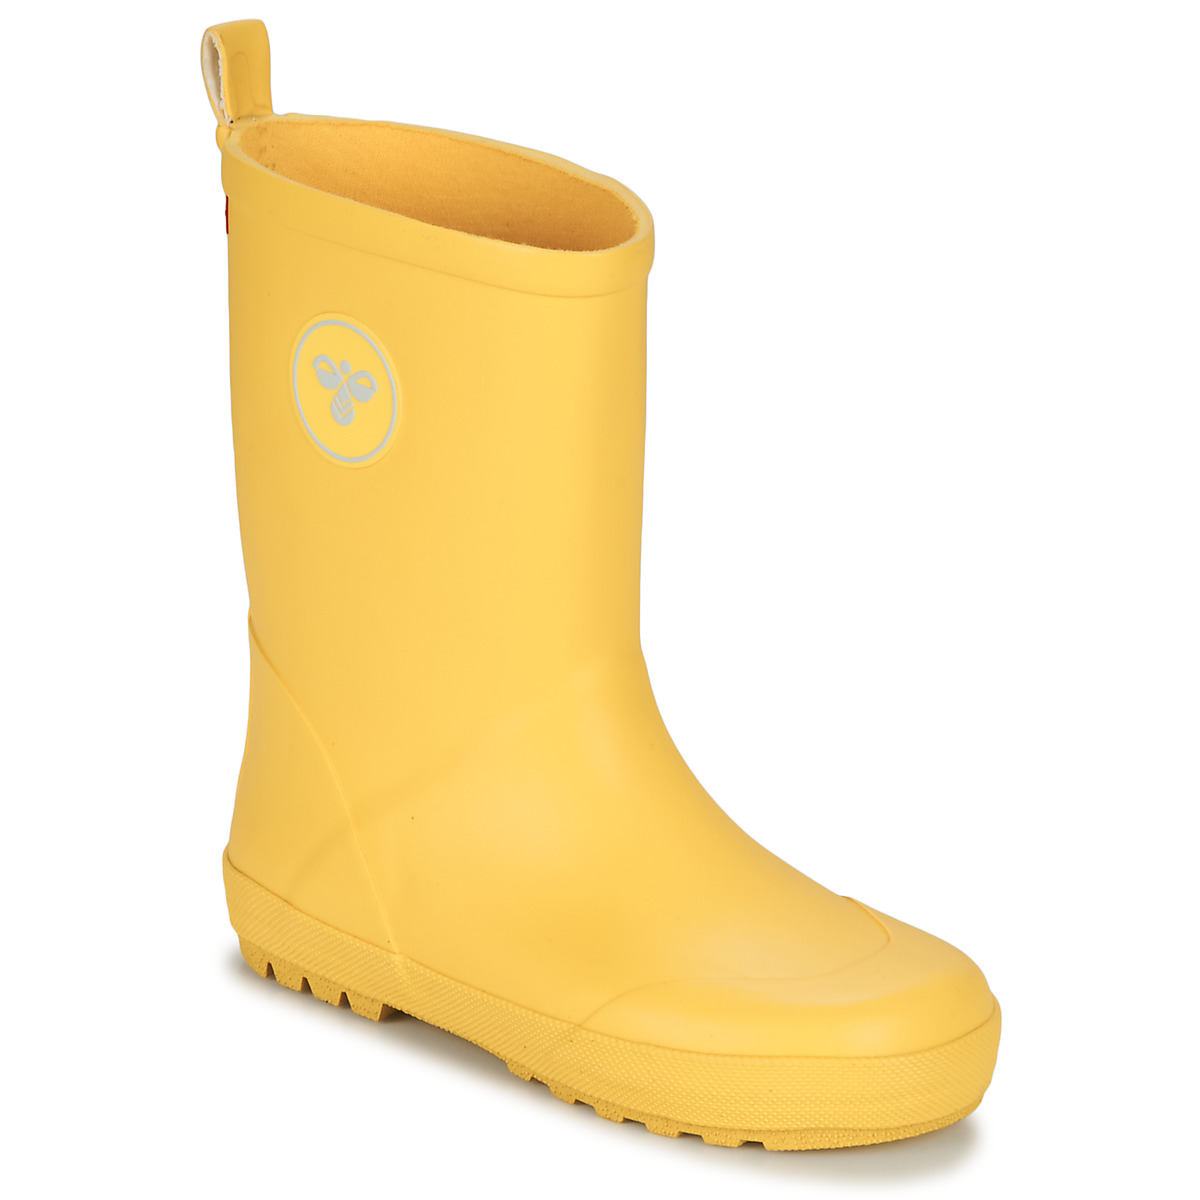 hummel RUBBER JR. delivery ! Child Yellow Shoes NET | - Free - boots Spartoo Wellington BOOT